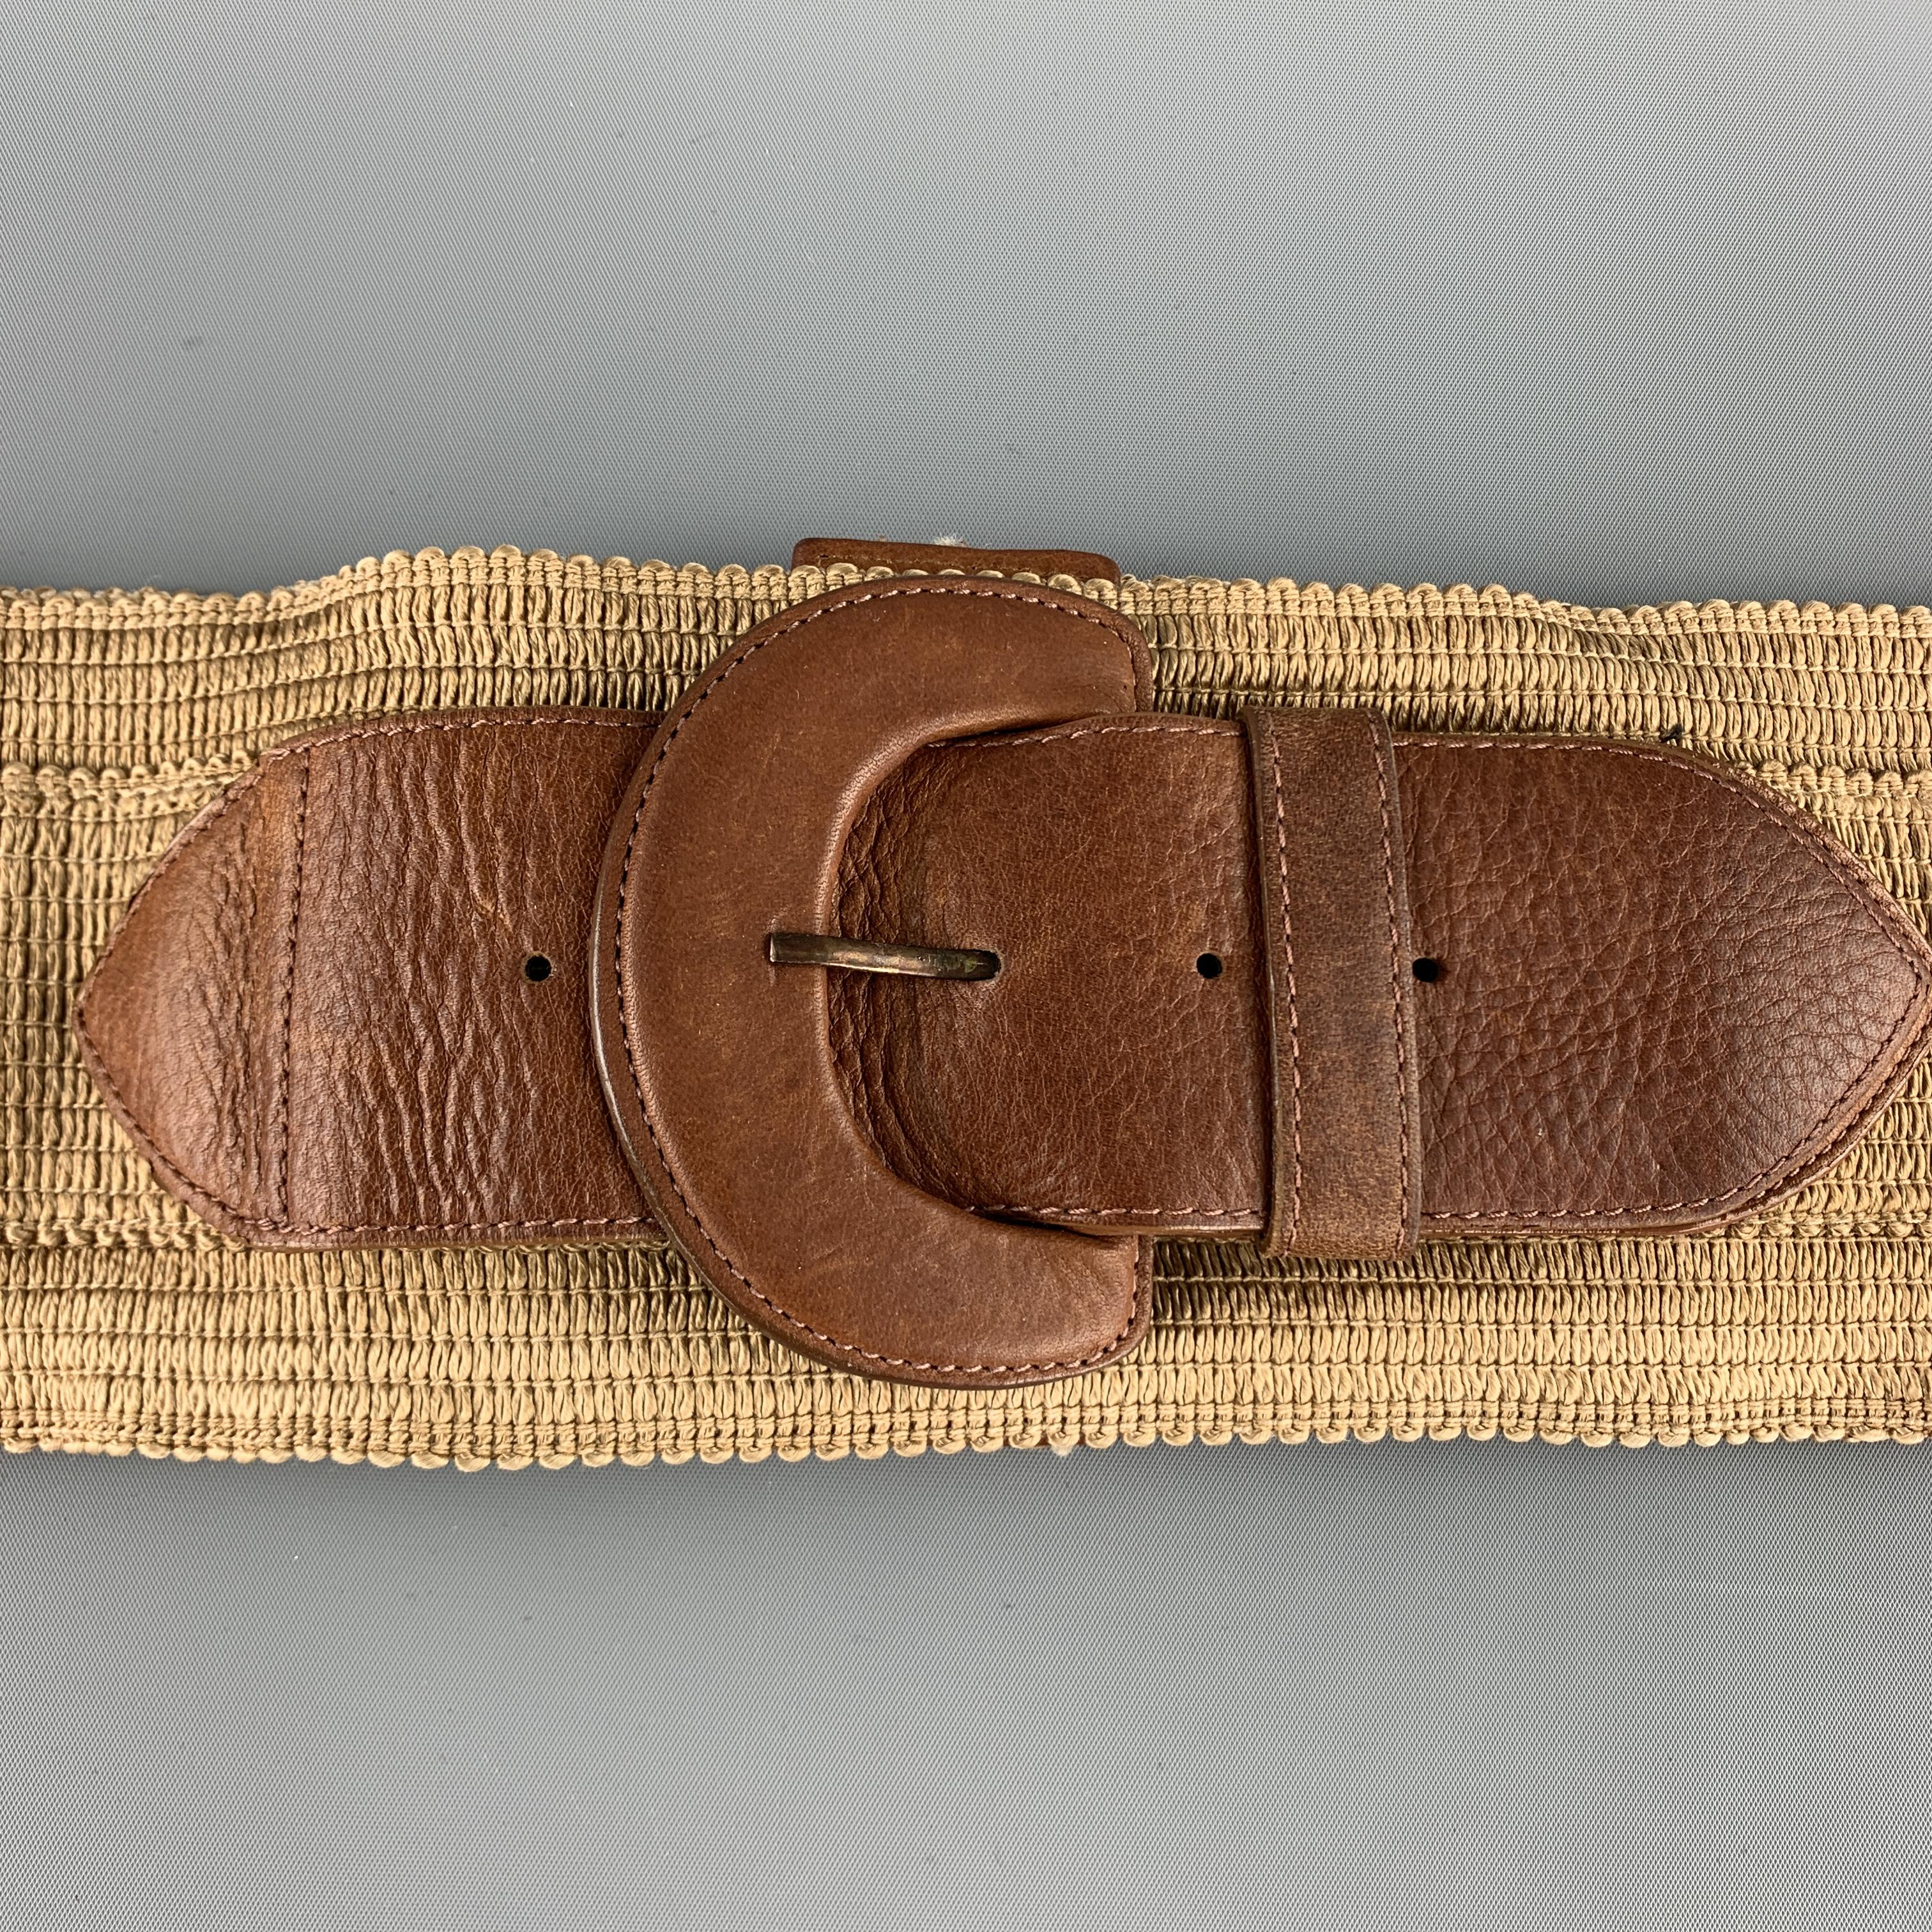 Vintage DONNA KARAN waist belt features a thick beige stretch band with a brown leather buckle embellishment and leather accented snap back closure. 
 

Very Good Pre-Owned Condition.
Marked: US 4

Length: 26 in.
Width: 4 in.
Fits: 25 in.